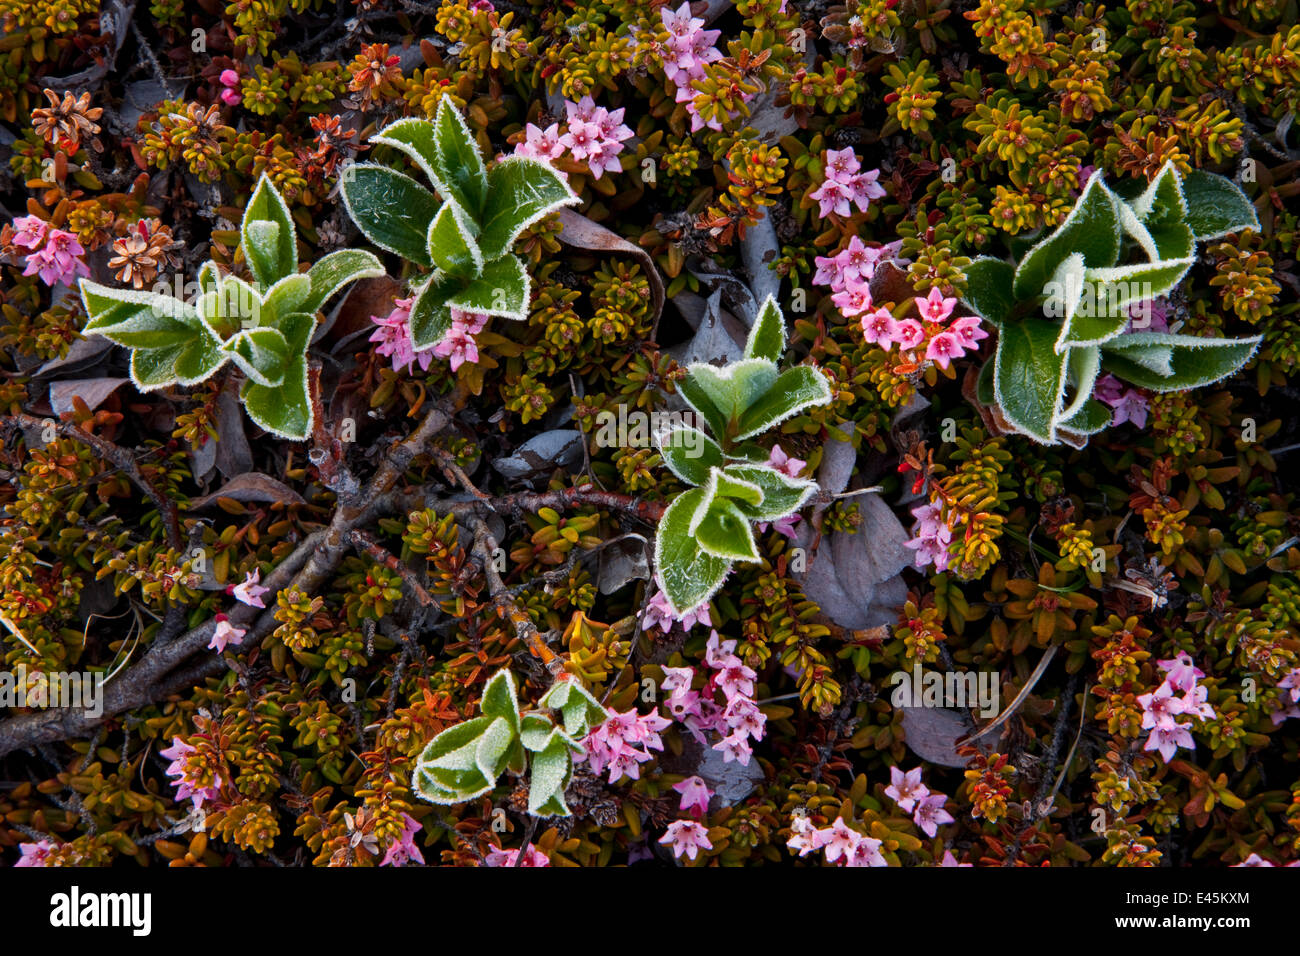 Dwarf willow (Salix herbacea) and flowering plant, Thingeyjarsyslur, Iceland, June 2009 Stock Photo